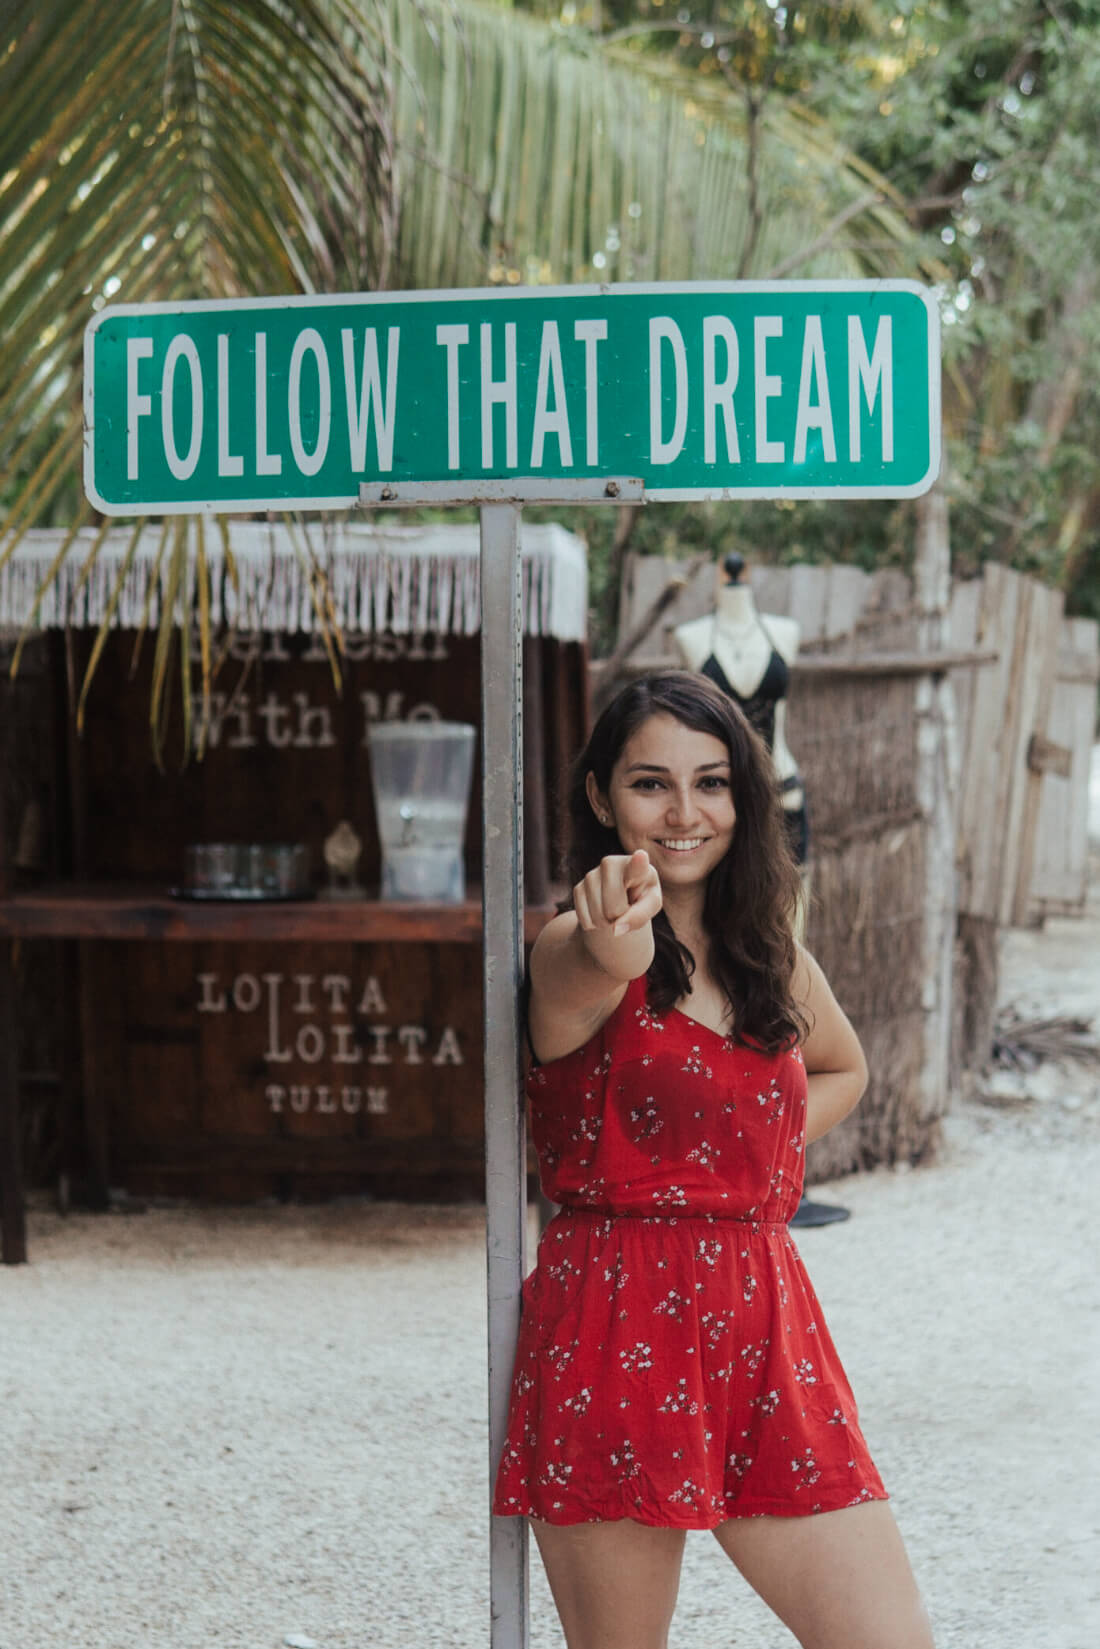 Stacey Valle pointing at the camera while standing under a sign that says Follow that dream